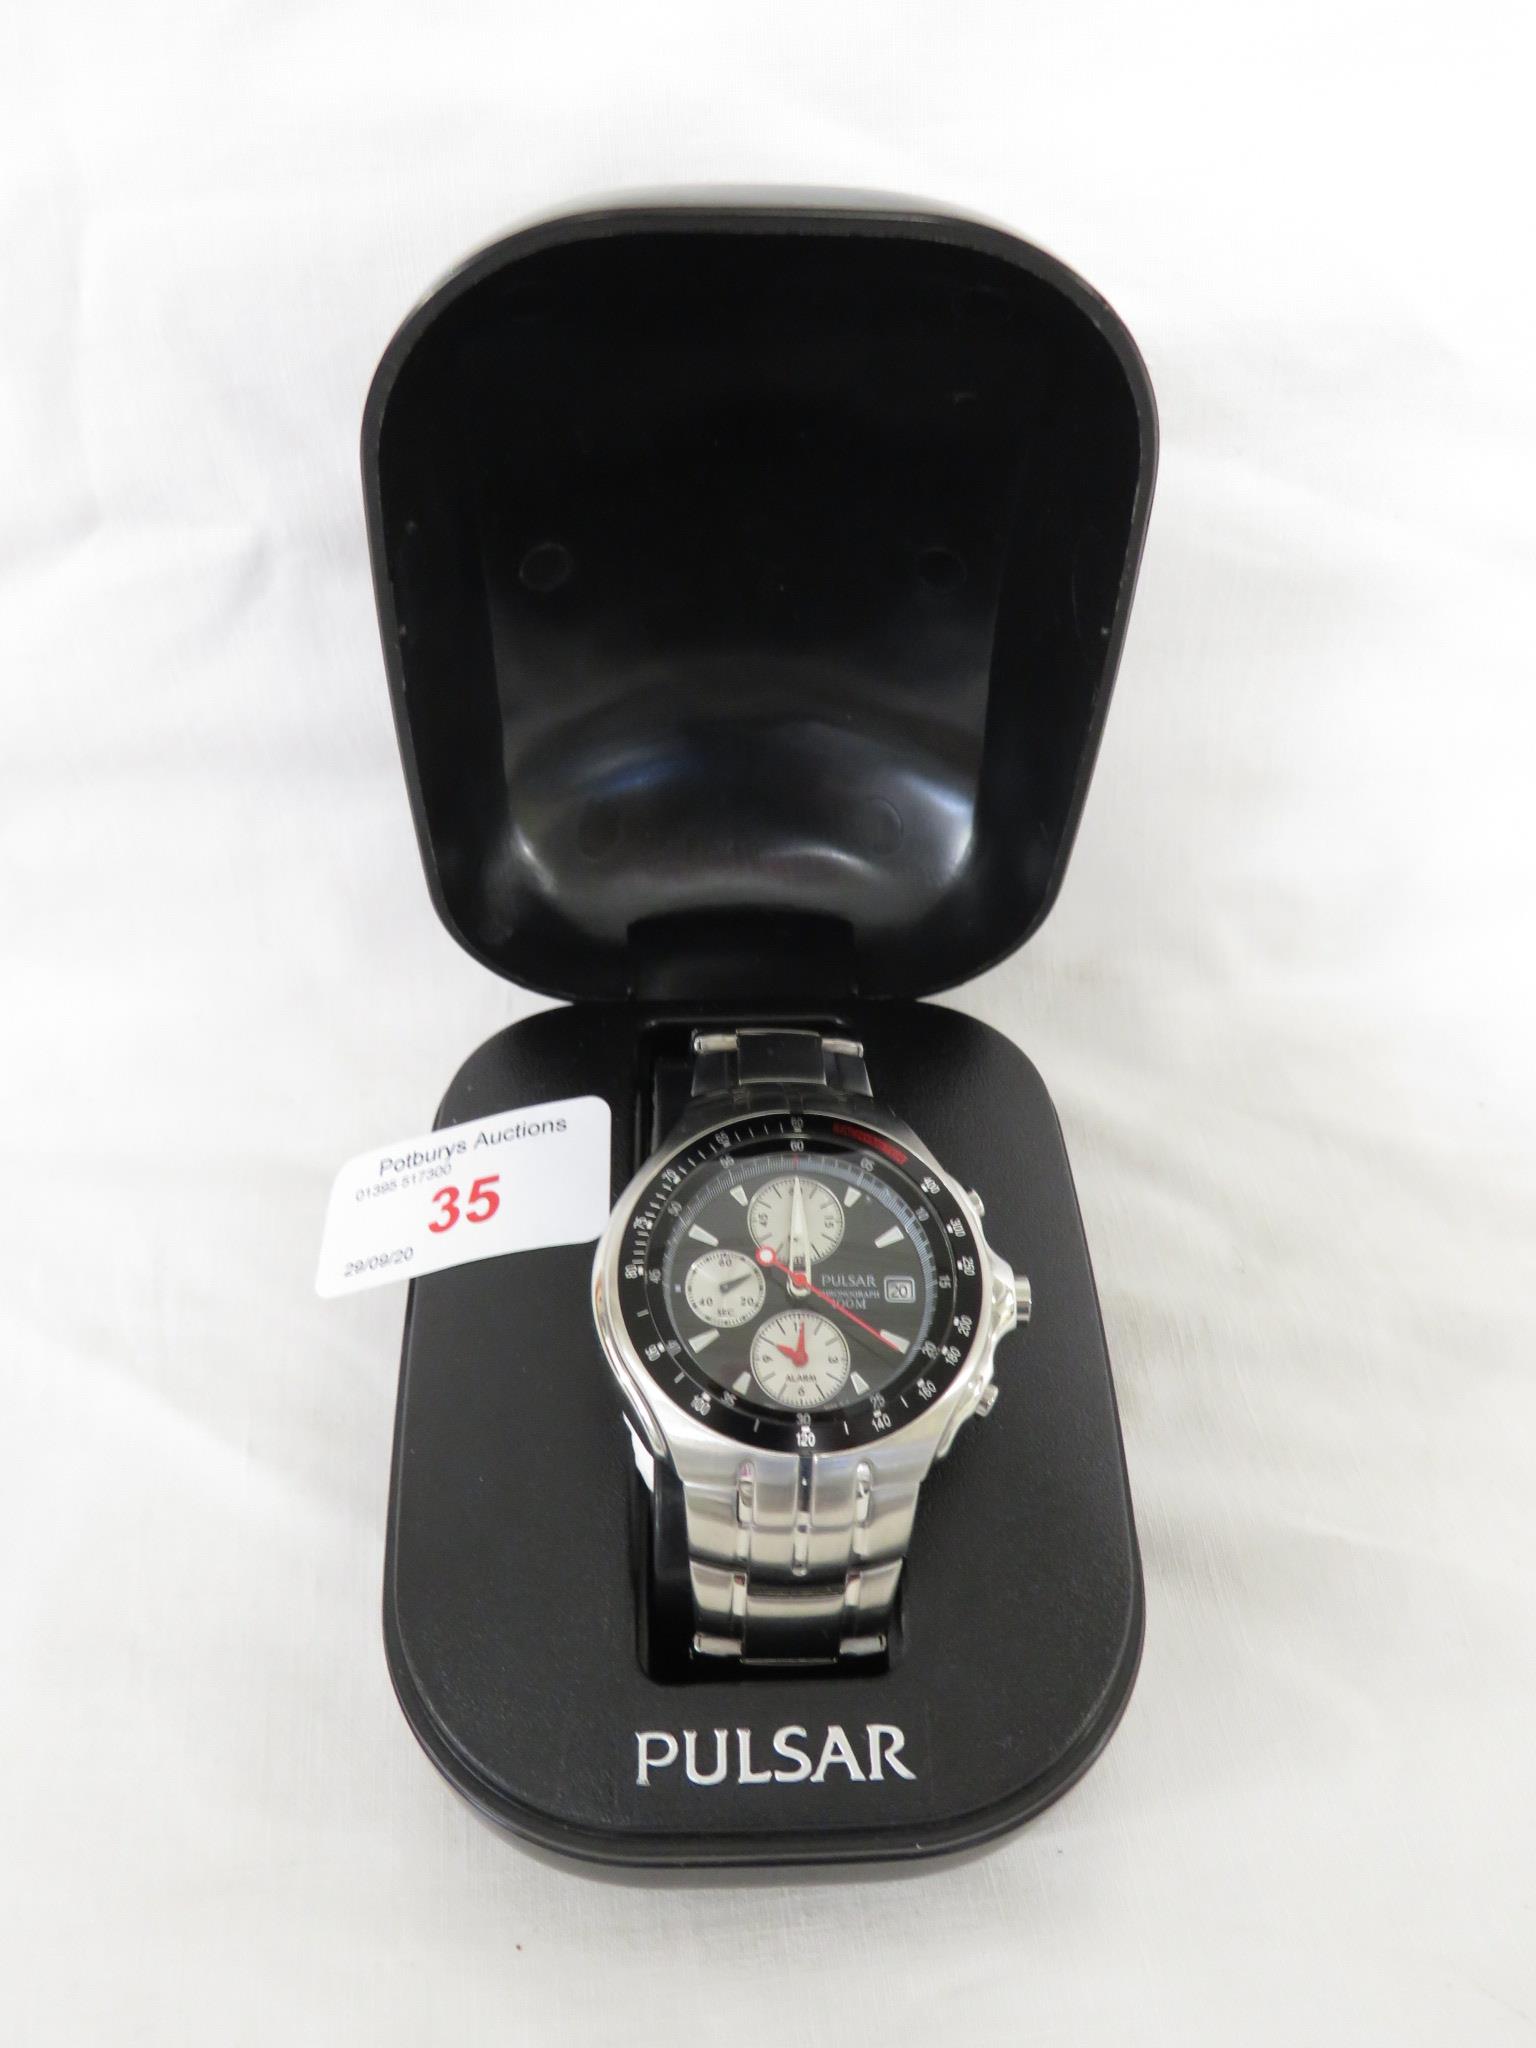 GENTS PULSAR CHRONOGRAPH WRISTWATCH WITH BOX